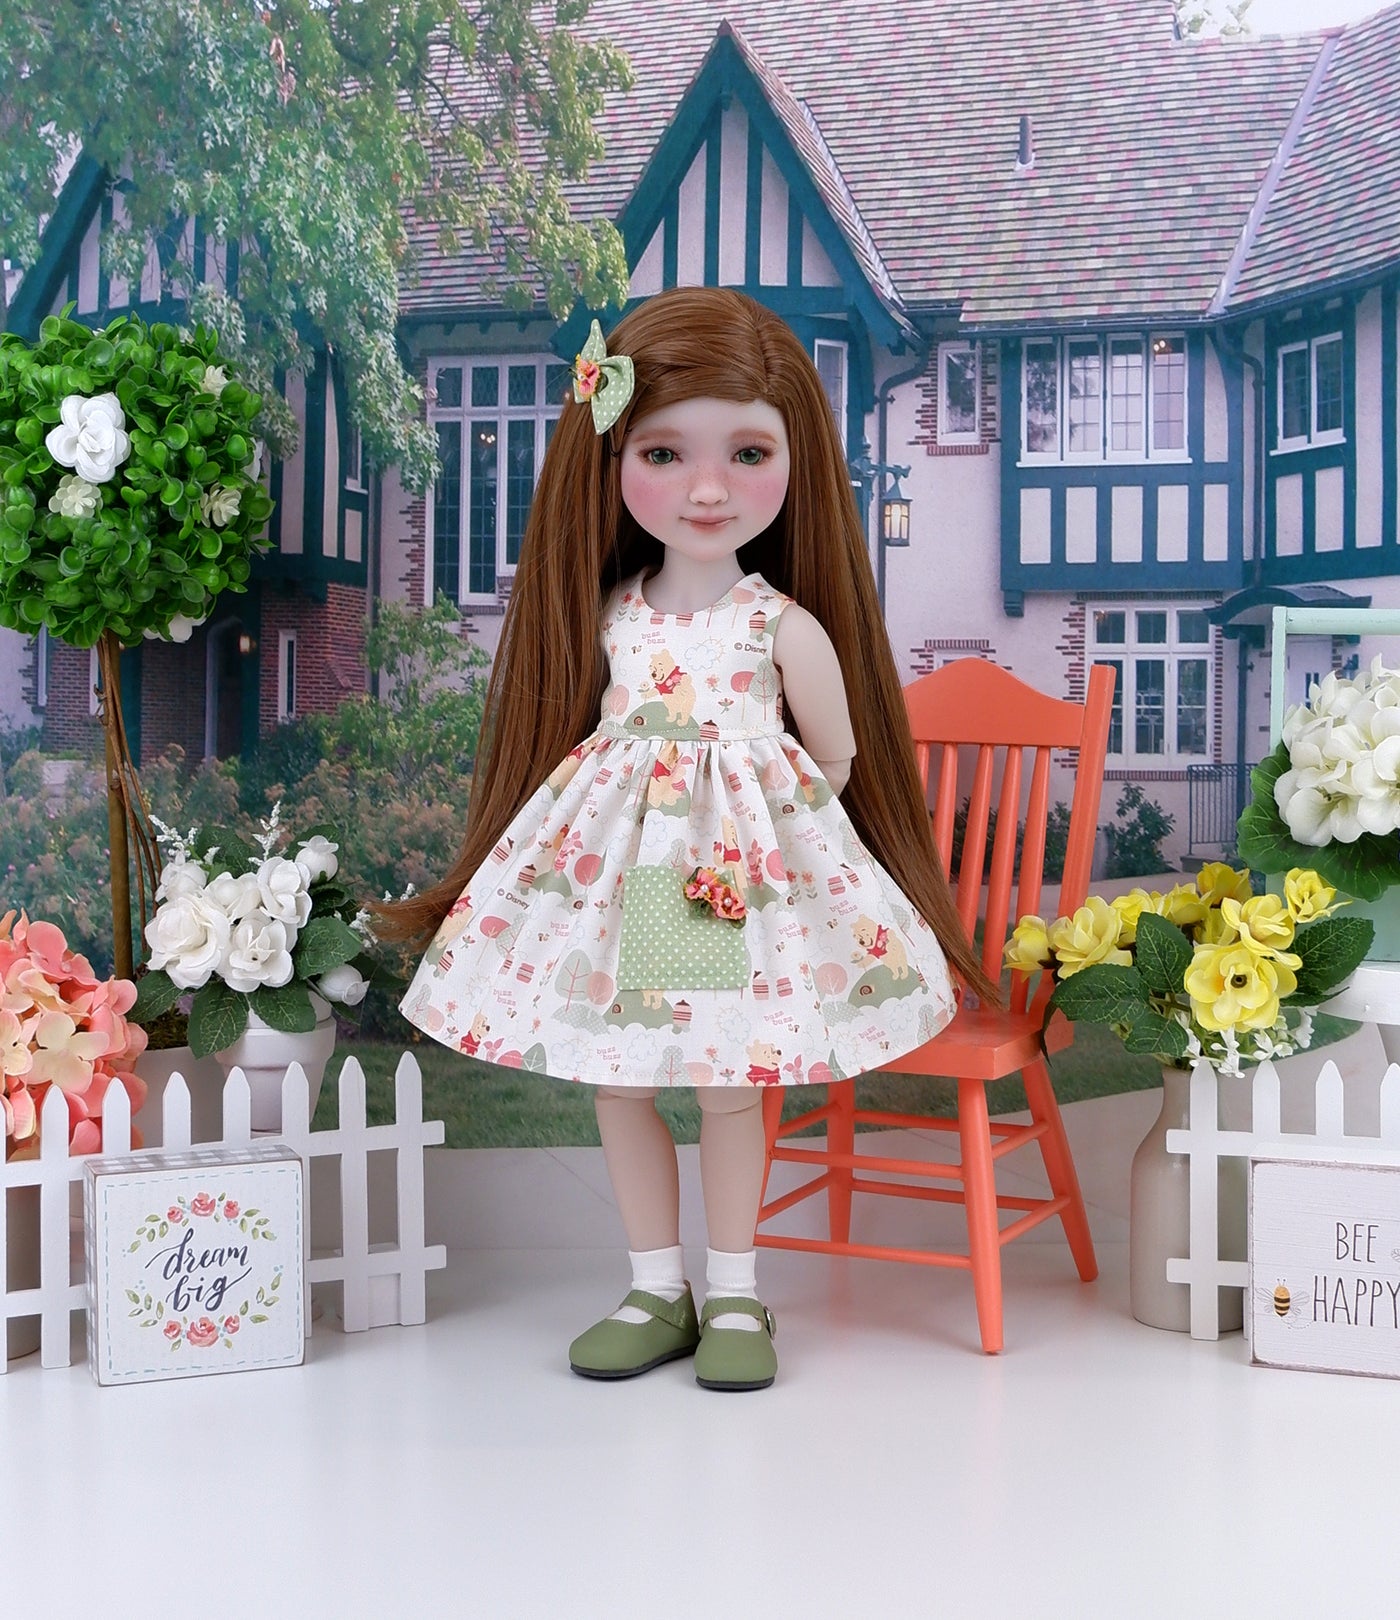 100 Acre Wood - dress with shoes for Ruby Red Fashion Friends doll